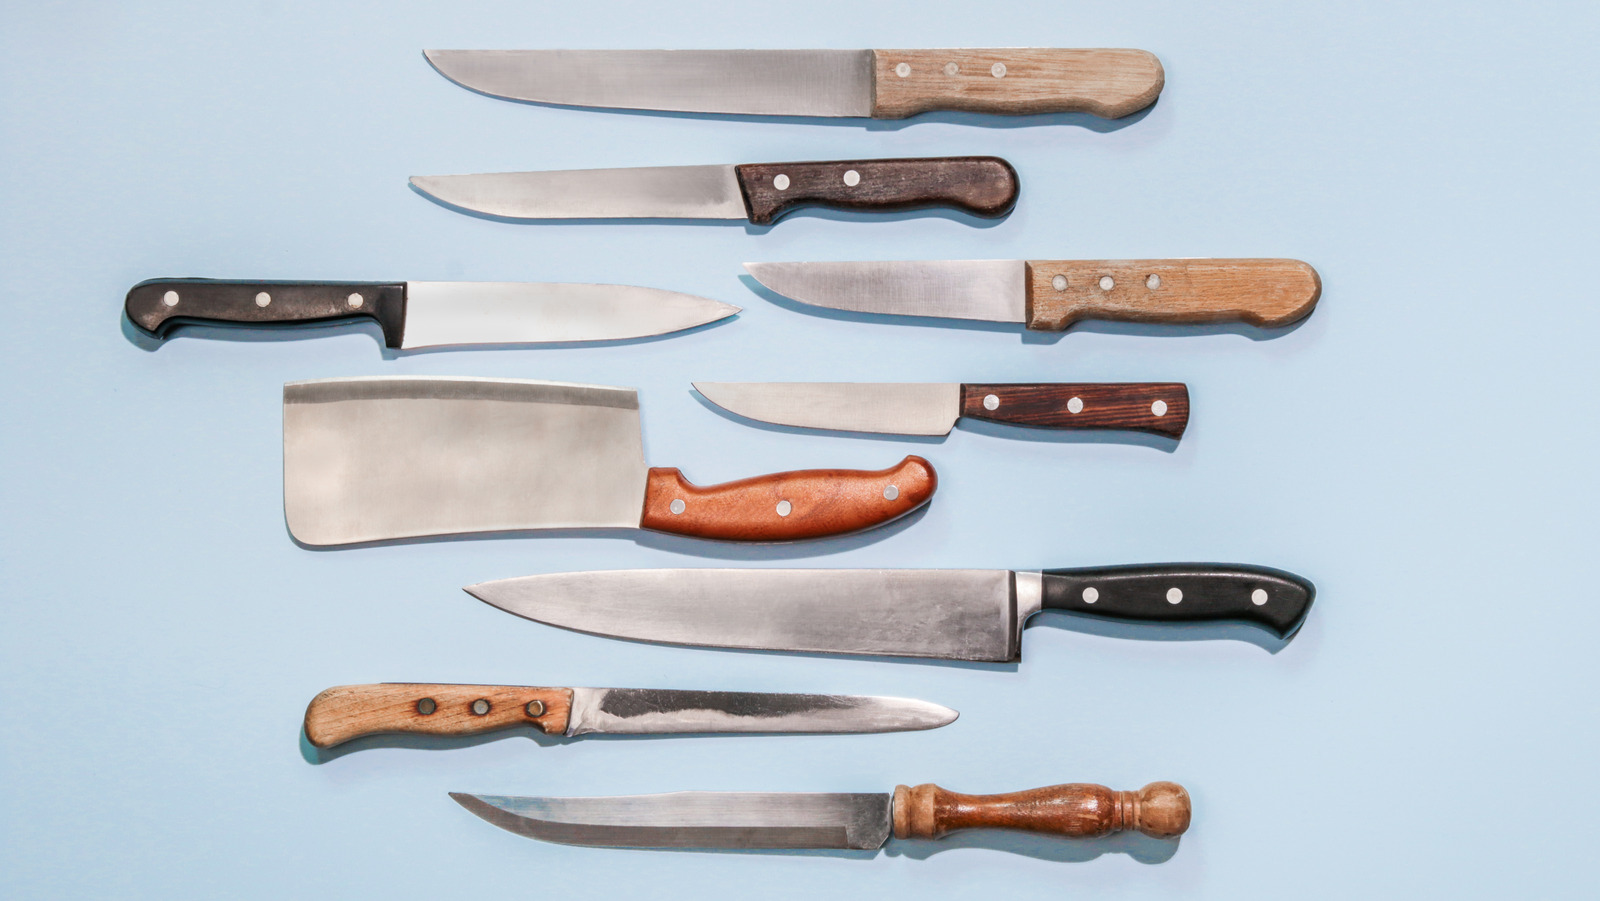 A chef explains how to keep your knives in tip-top shape